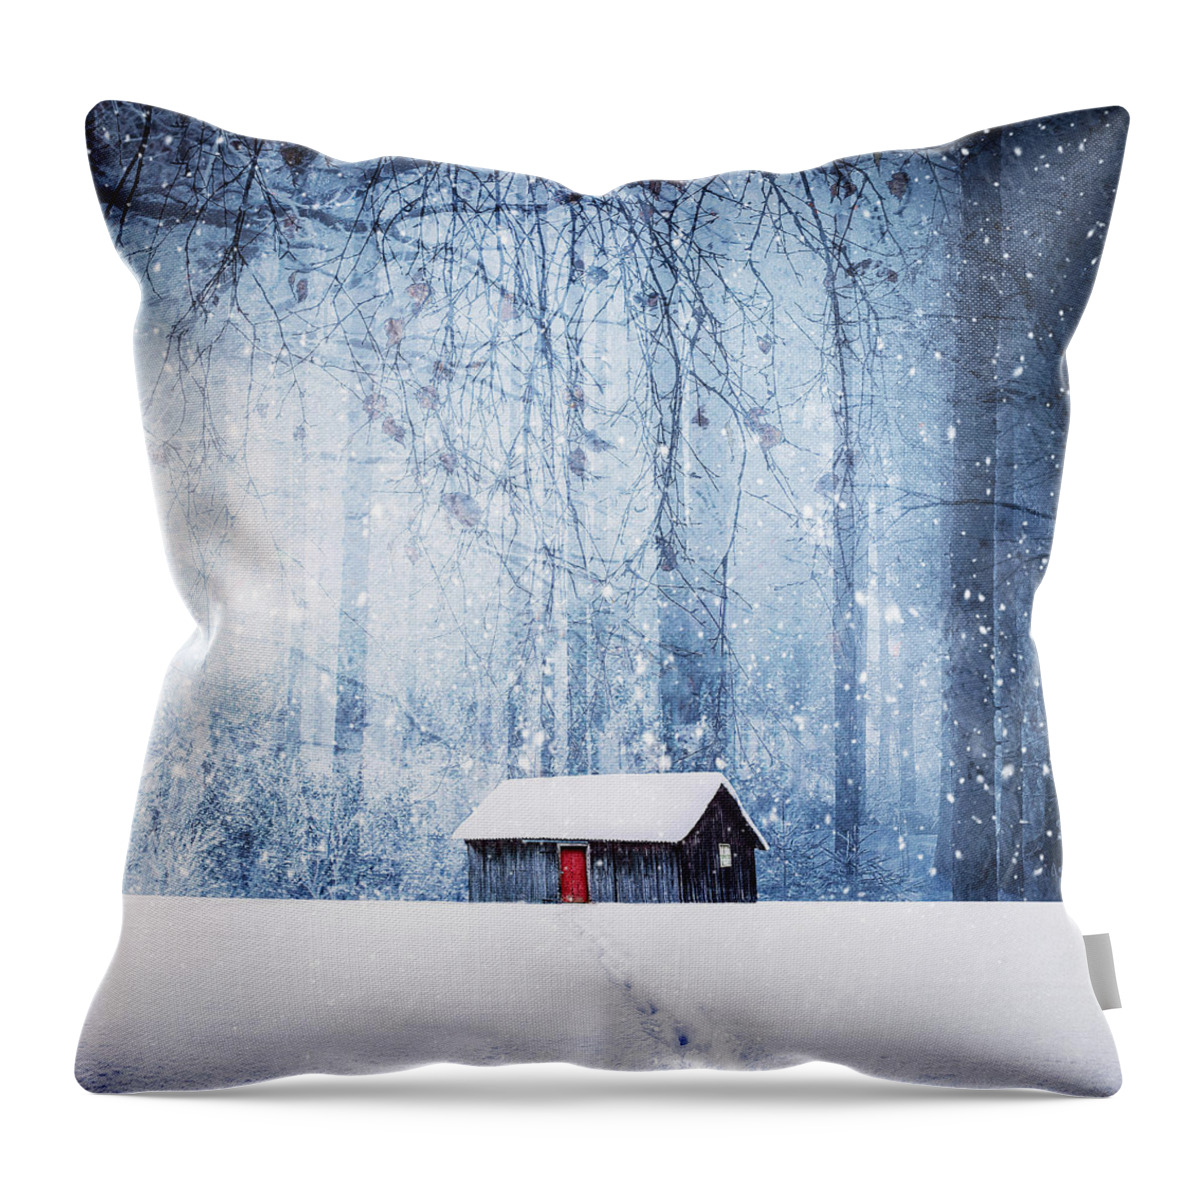 Yellow Throw Pillow featuring the photograph Winter by Bess Hamiti